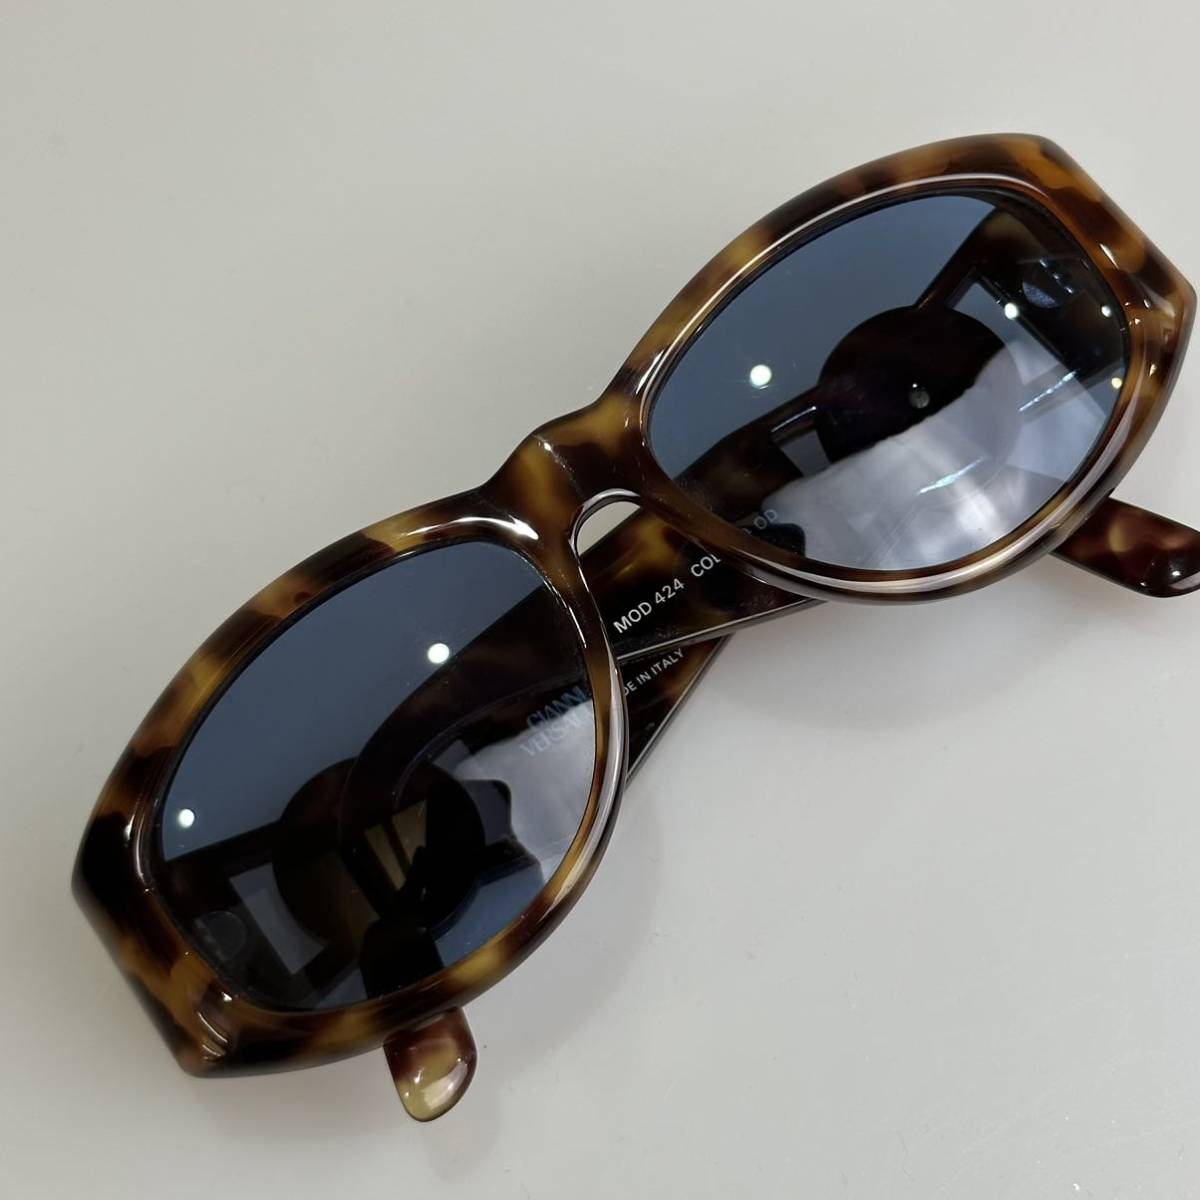 90s GIANNI VERSACE Gianni Versace MOD.424 Brown mete.-savintage sunglasses records out of production goods 